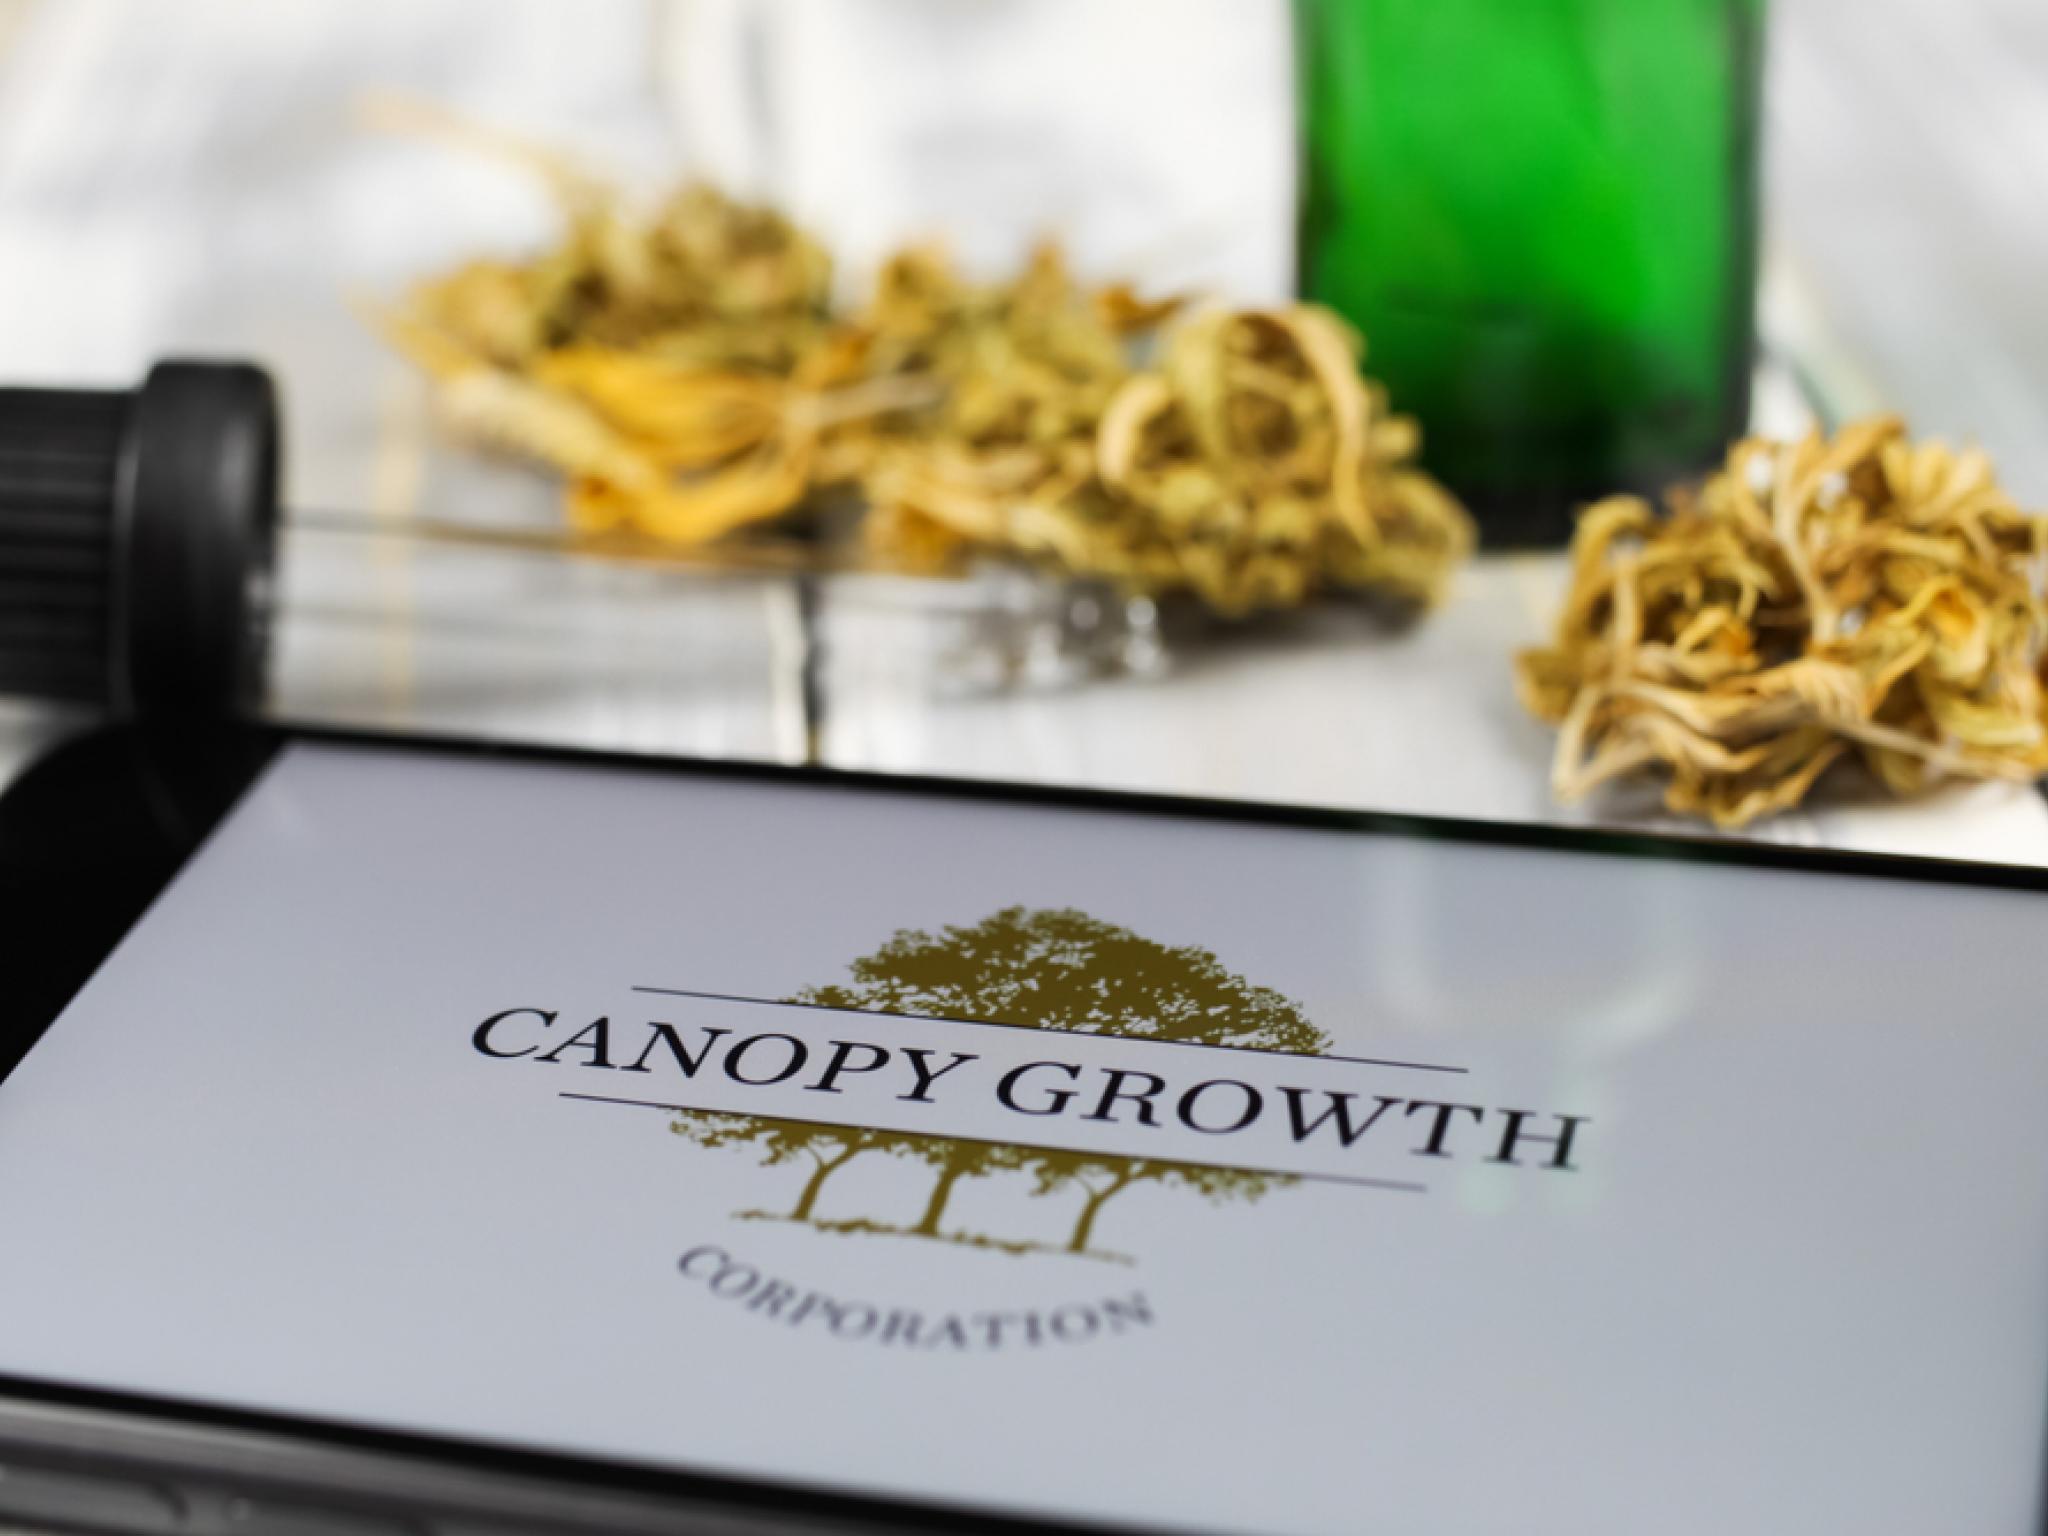  canopy-growth-stock-is-falling-thursday-whats-going-on 